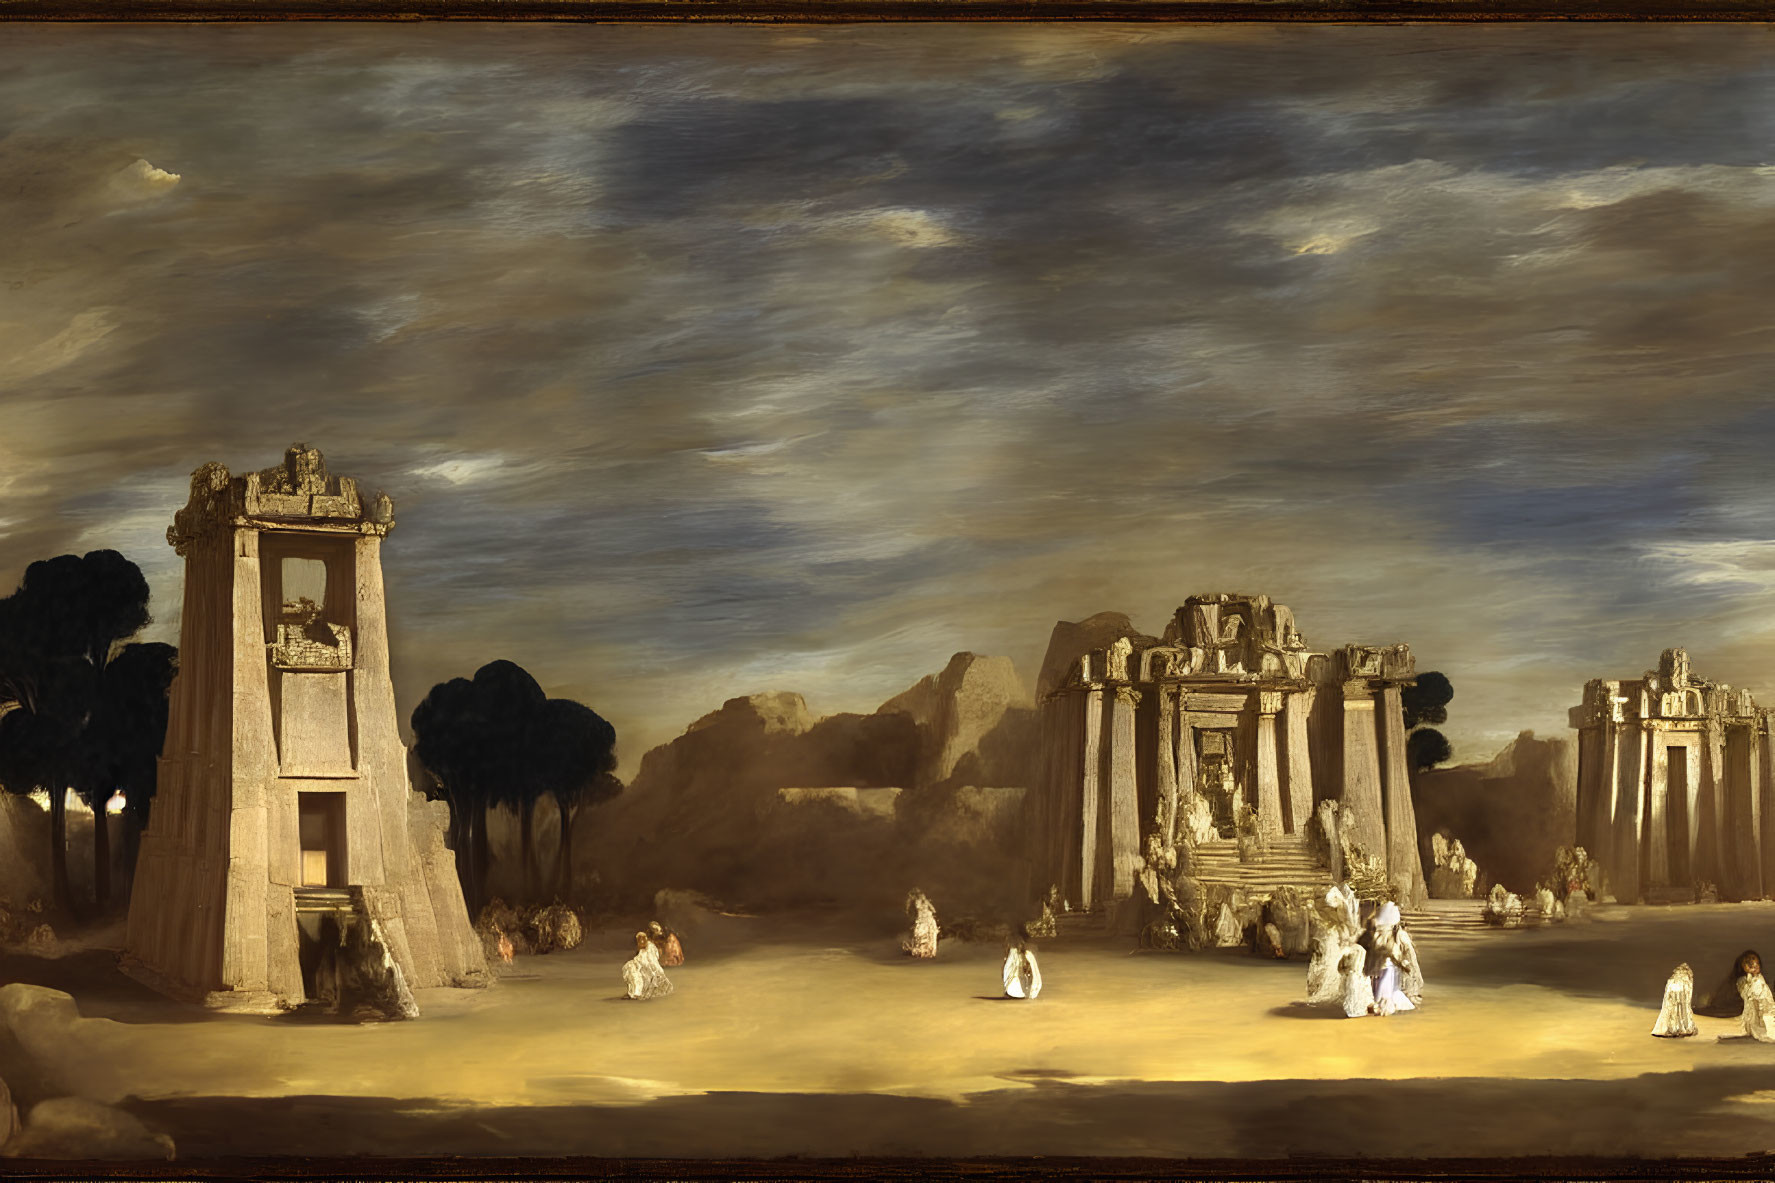 Classical ruins painting with figures in white robes under dramatic sky